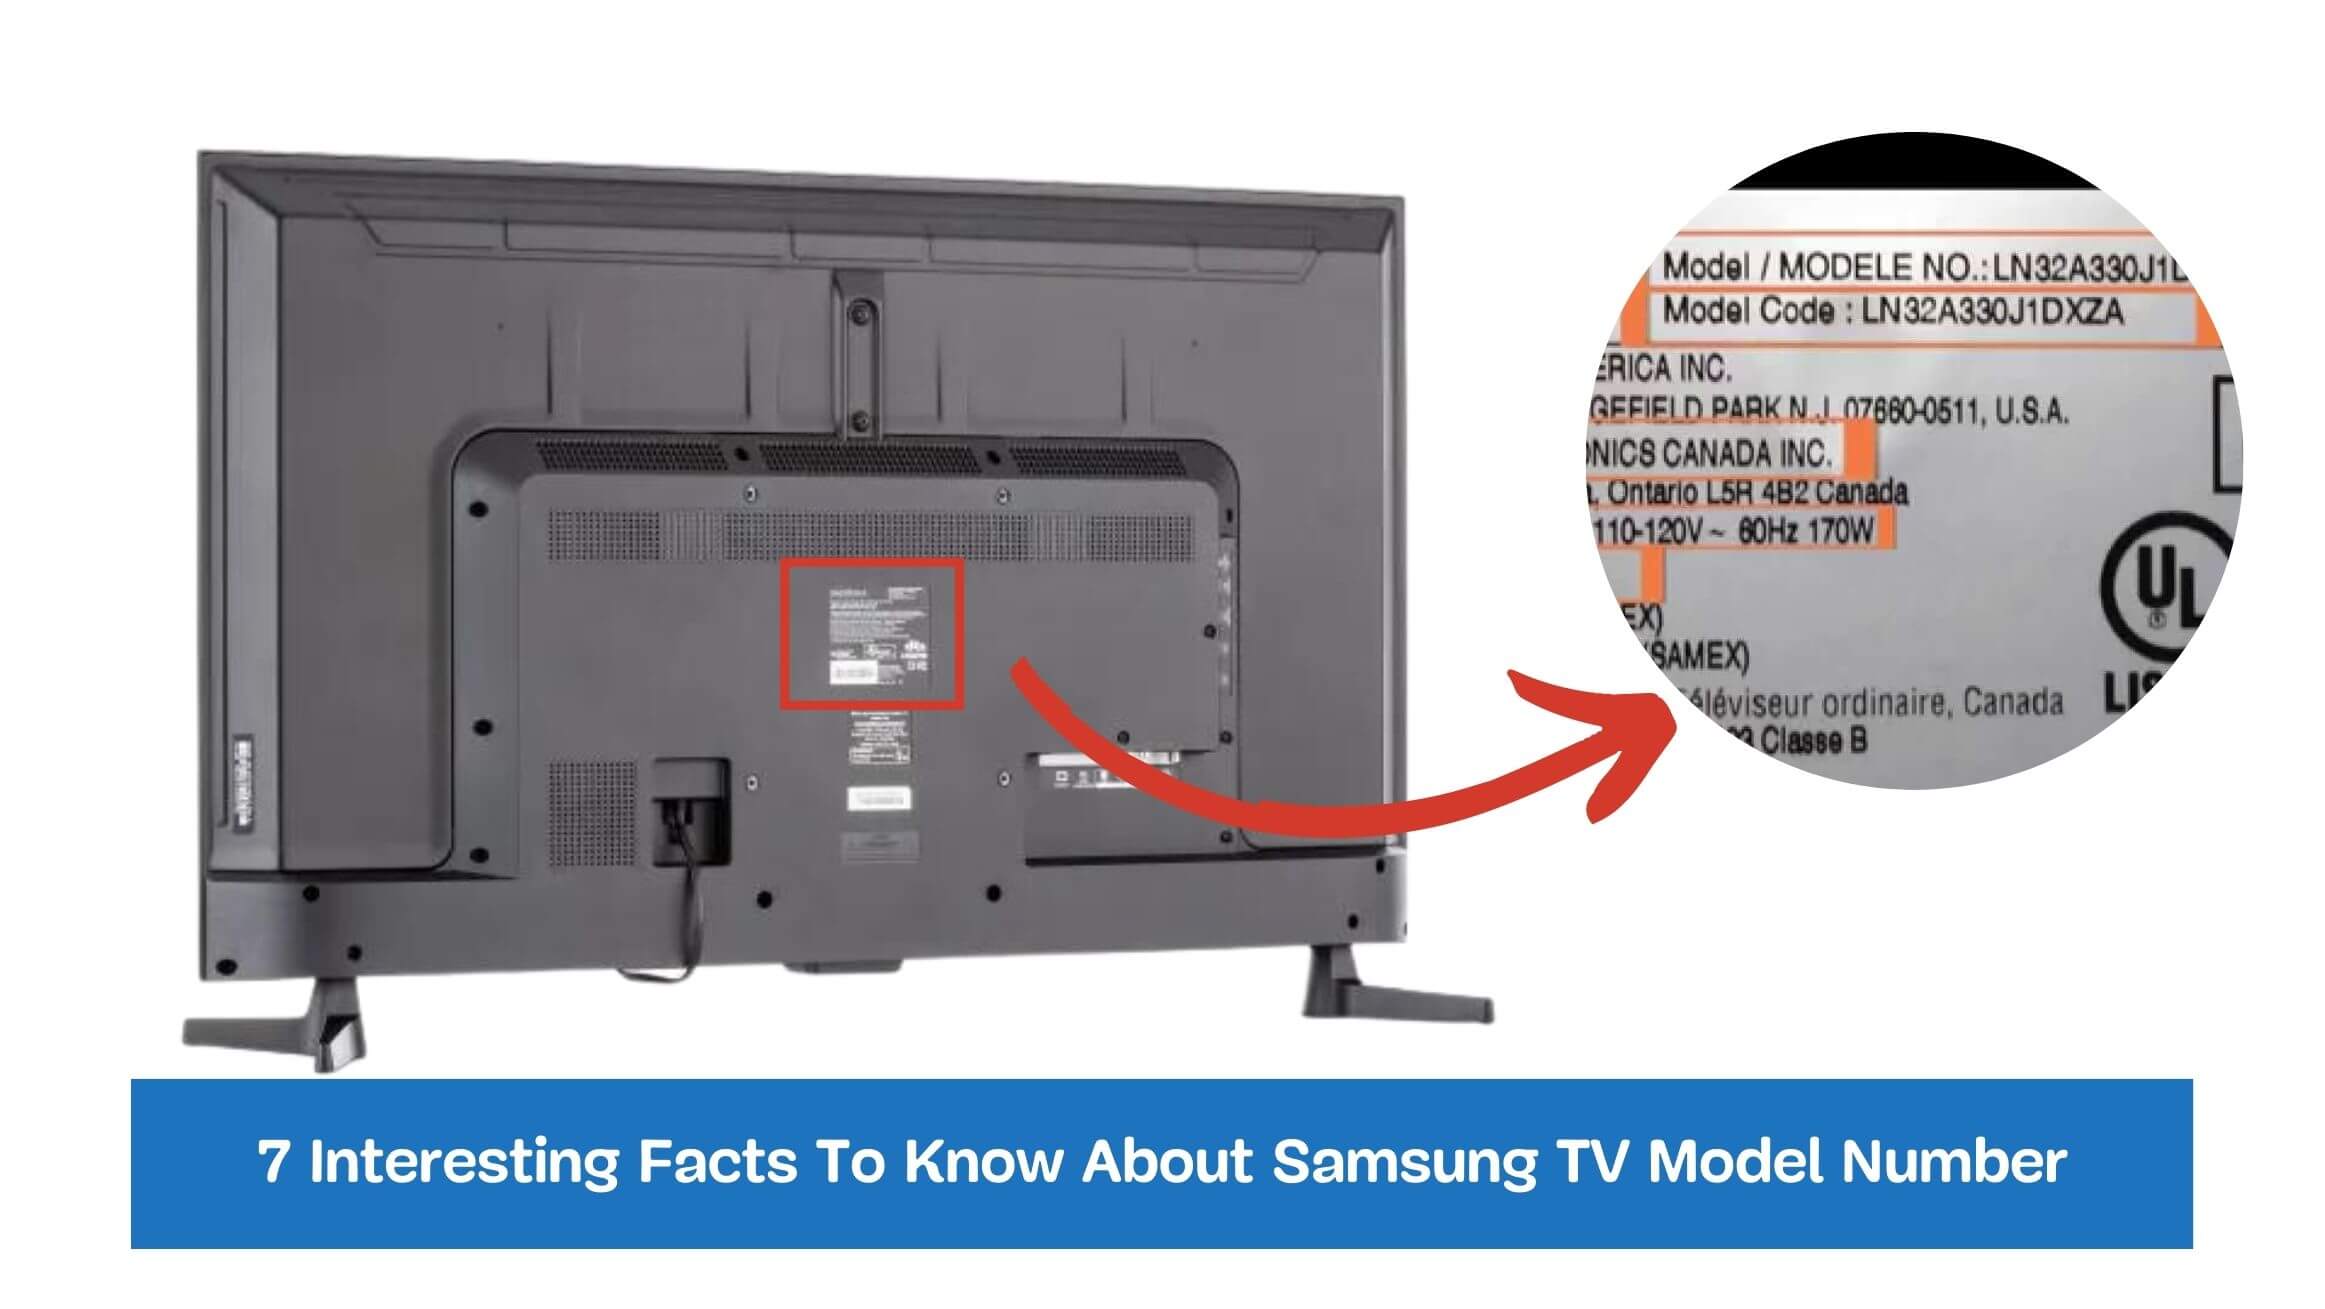 7 Interesting Facts To Know About Samsung TV Model Number